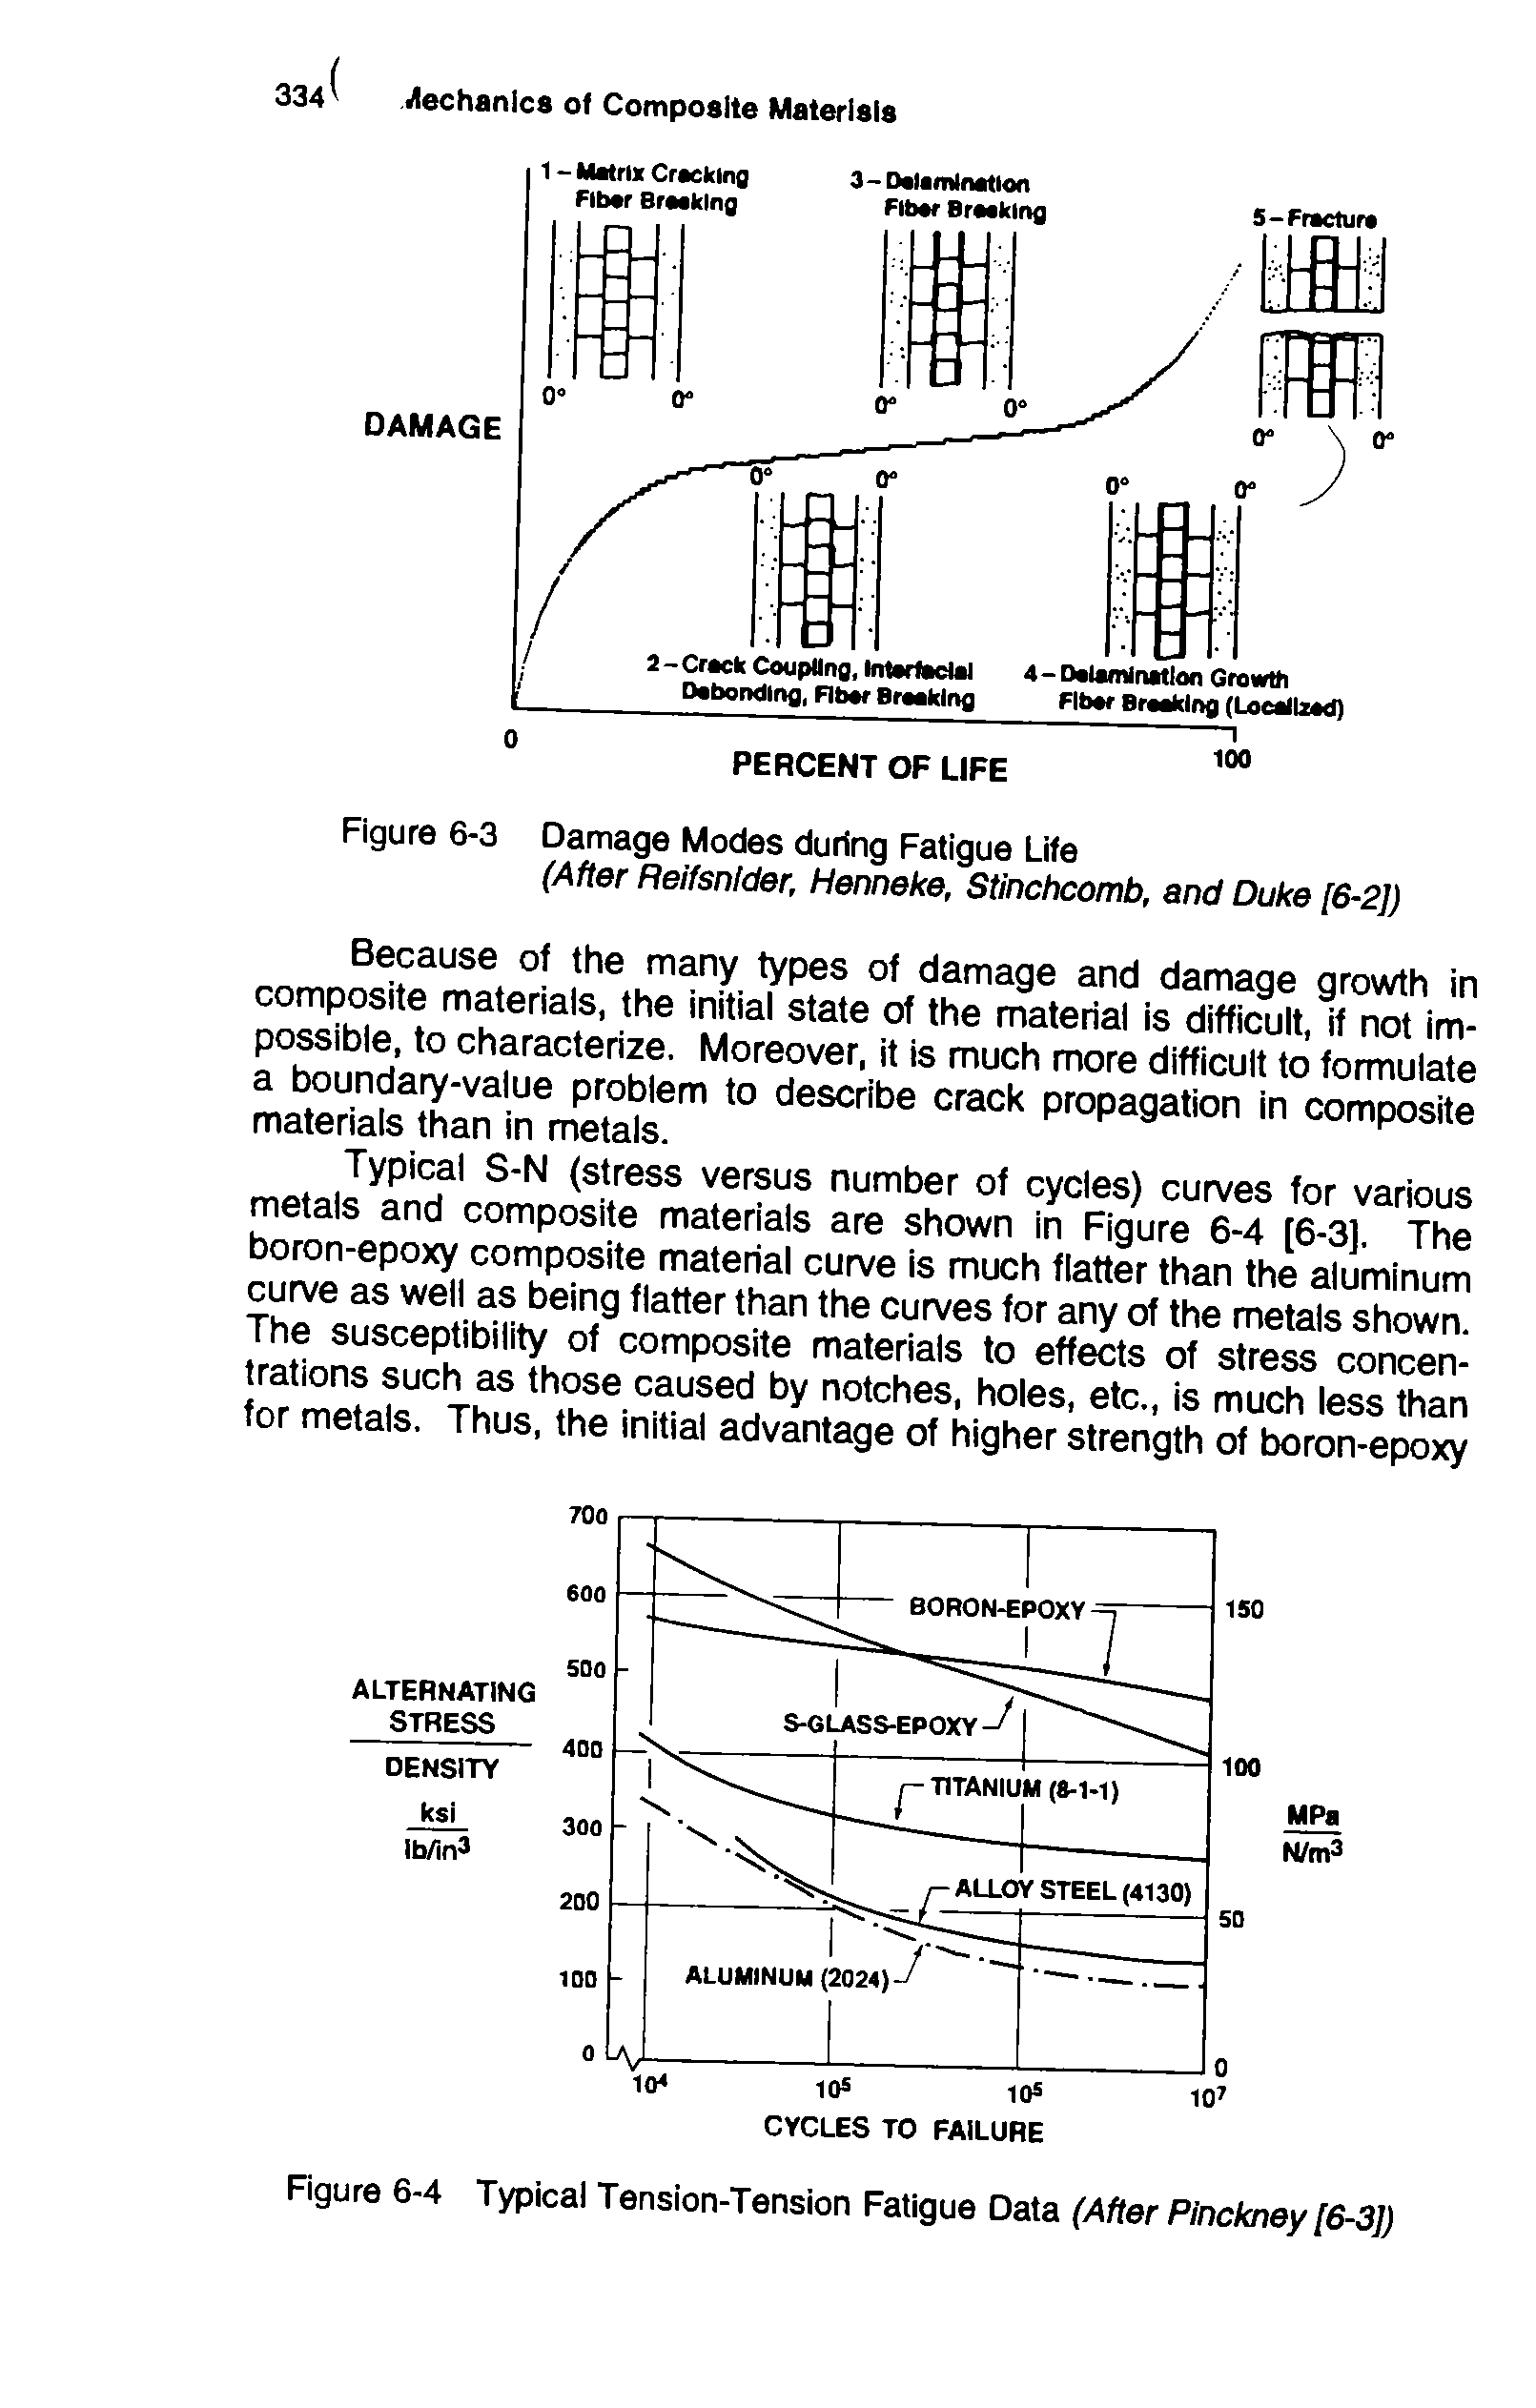 Figure 6-4 Typical Tension-Tension Fatigue Data (After Pinckney [6-3])...